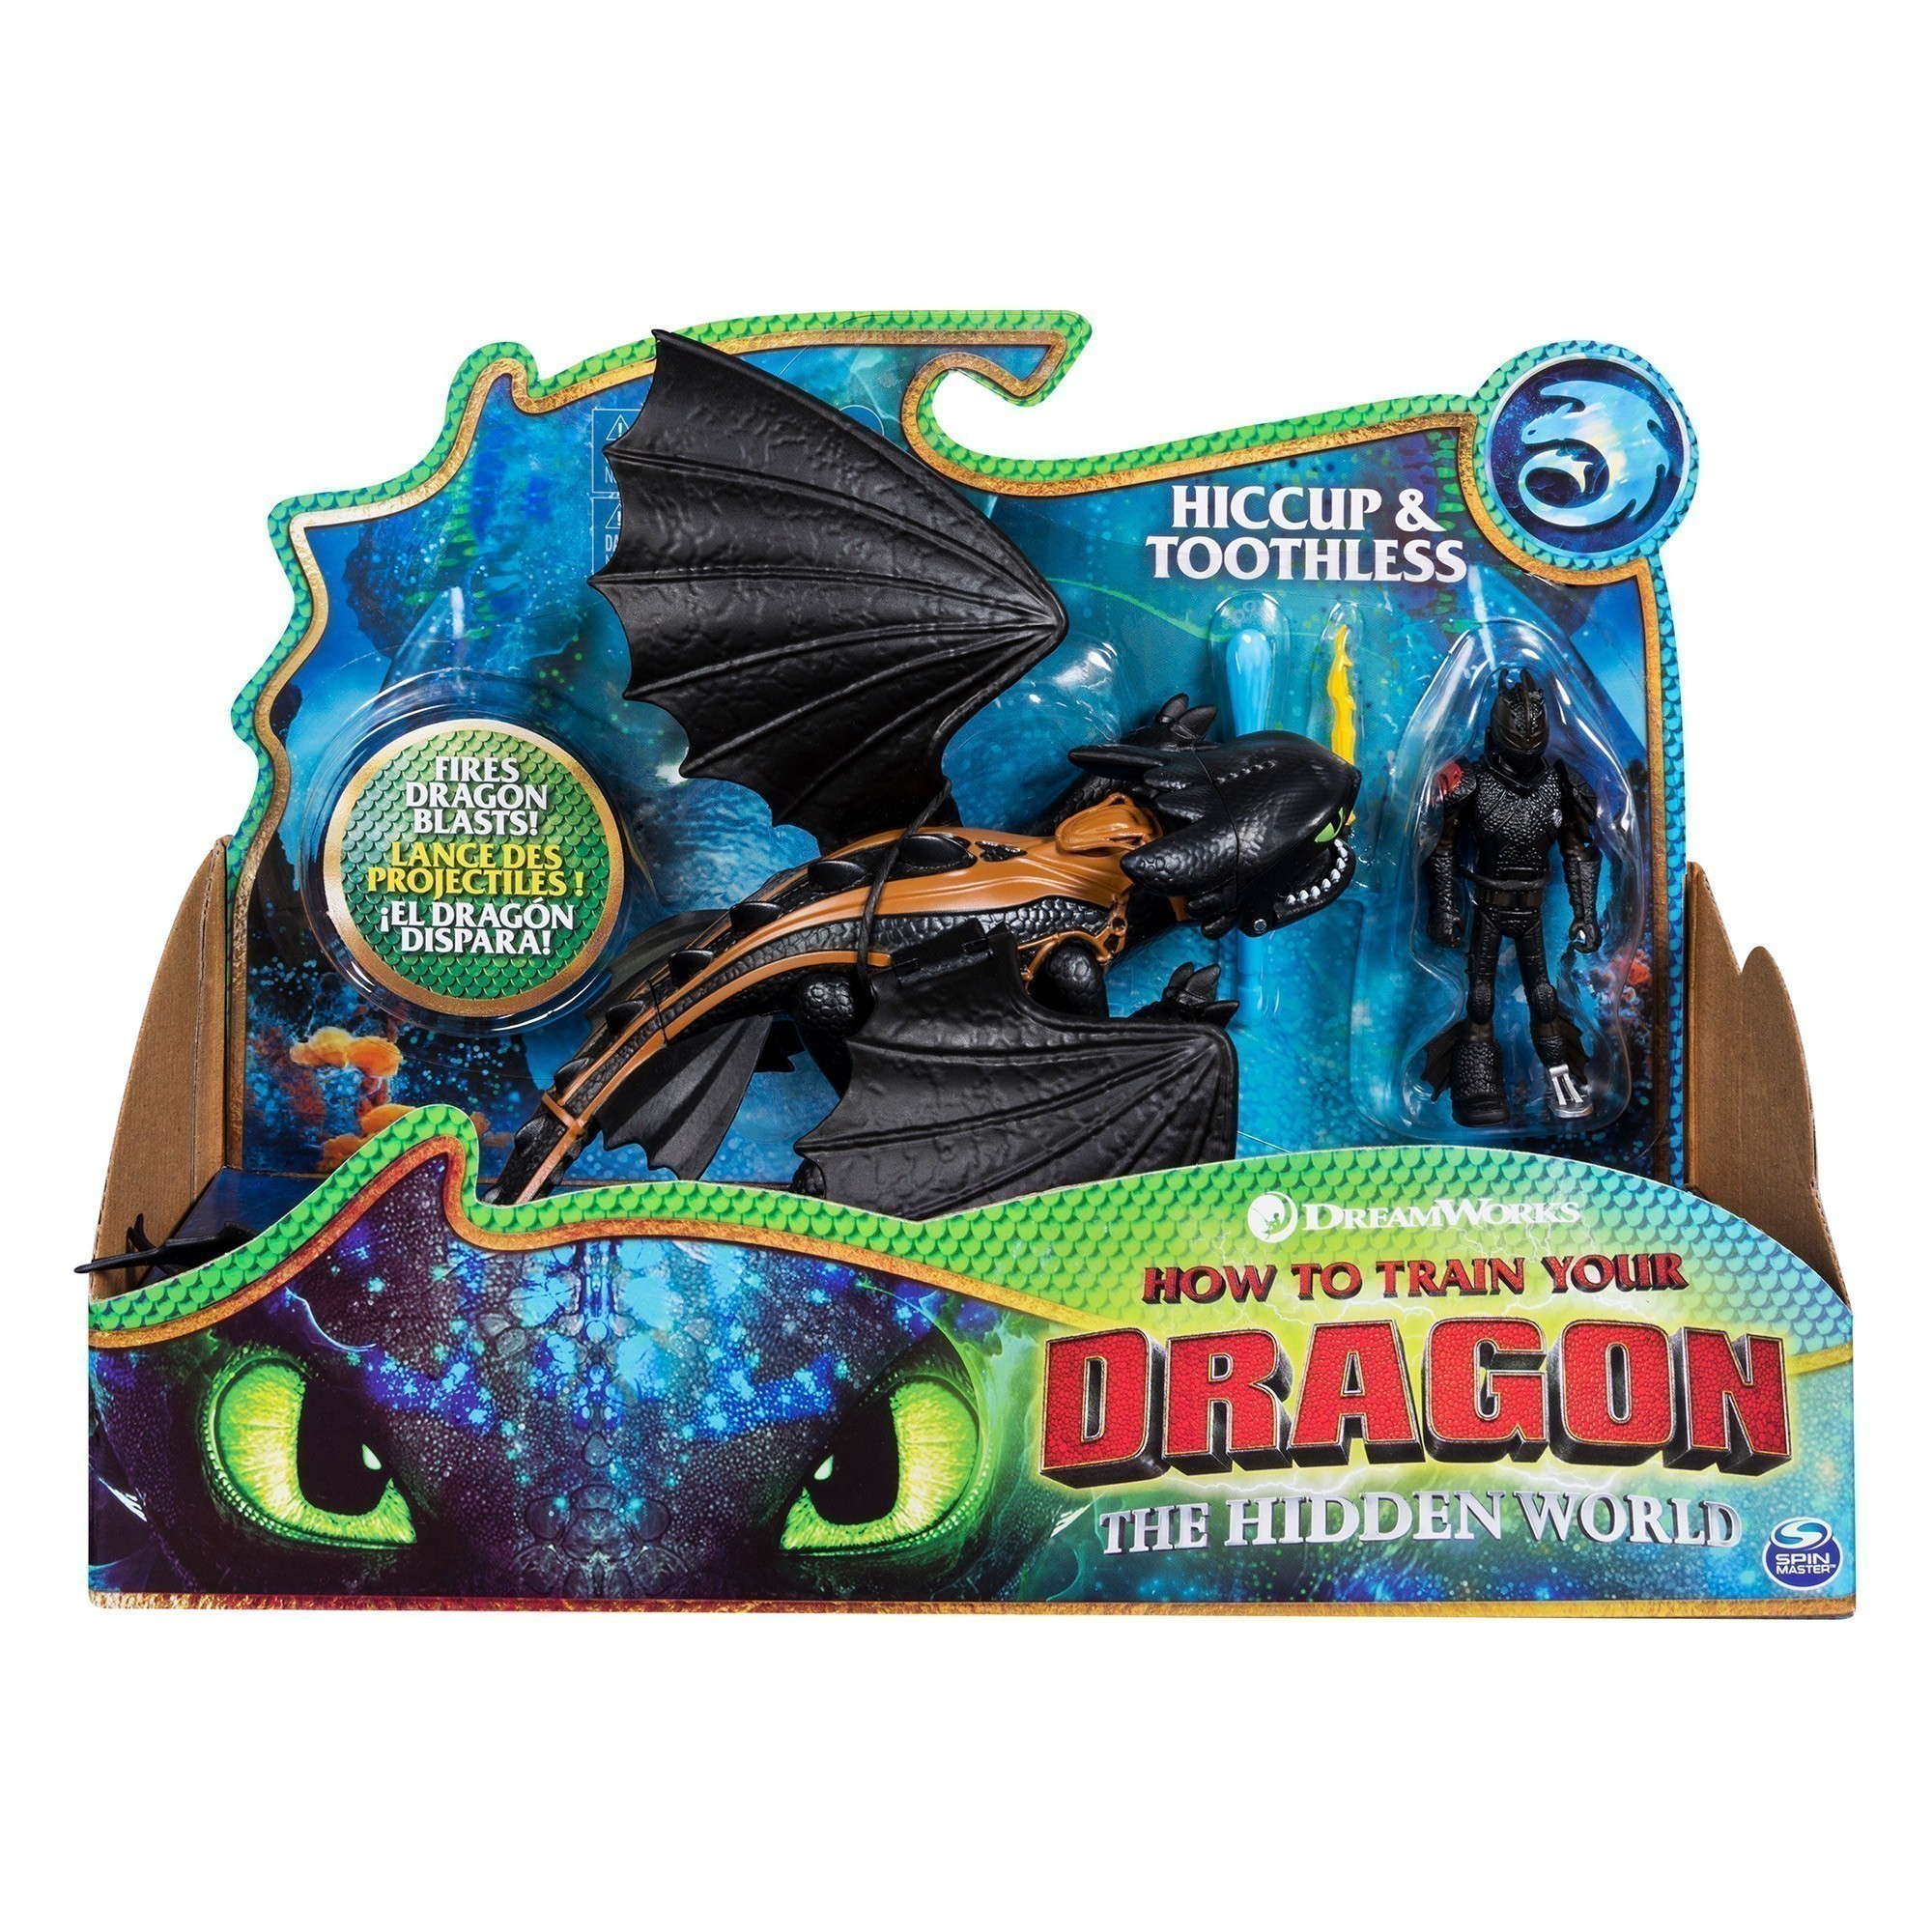 Dreamworks - How To Train Your Dragon 3 - Hiccup & Toothless